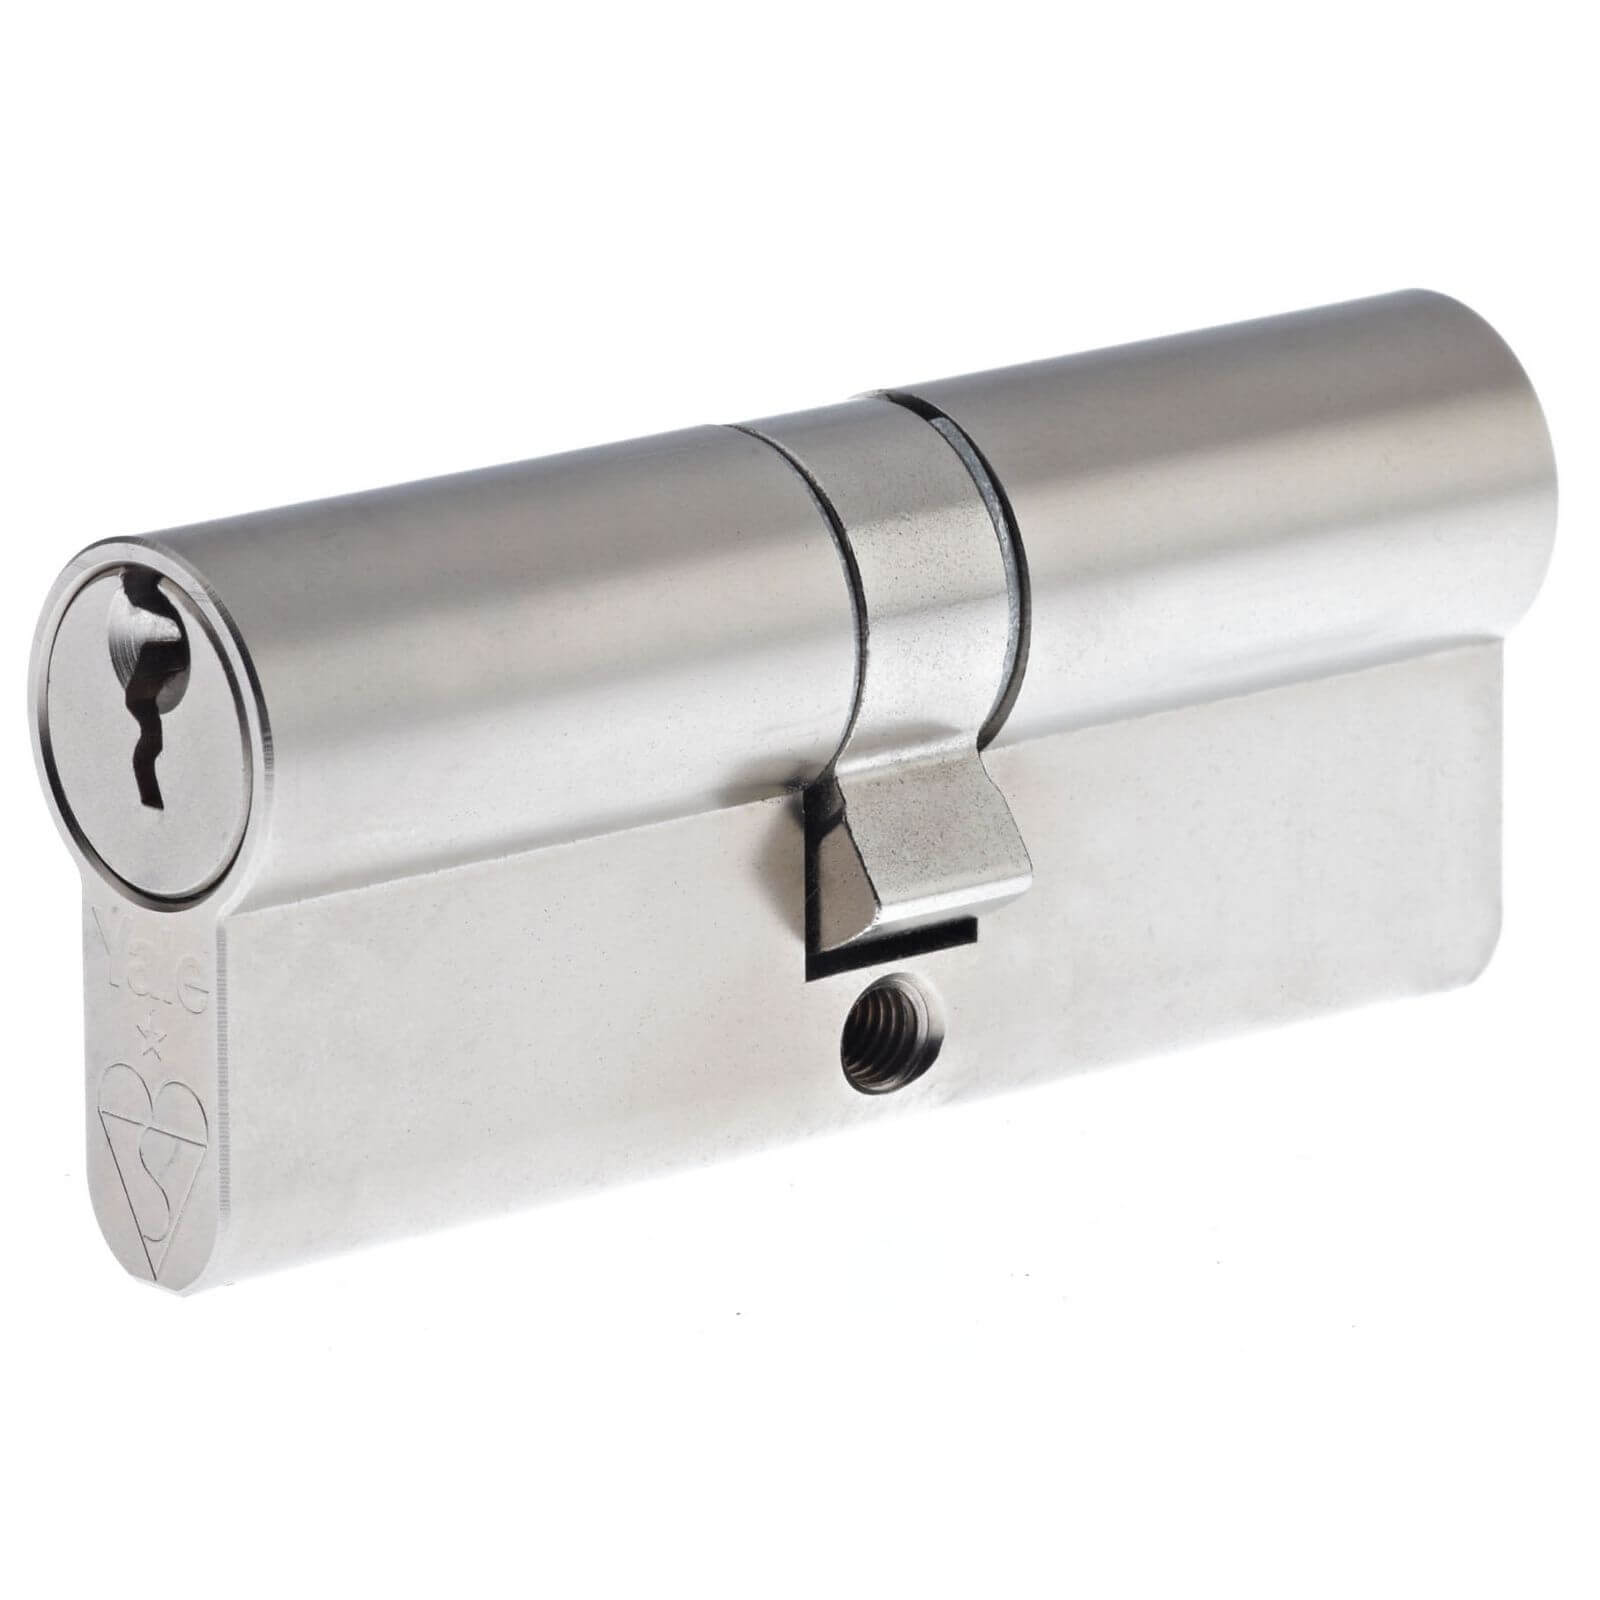 Yale Kitemarked Euro Double Cylinder - 40:10:50 (100mm) - Nickel Plated